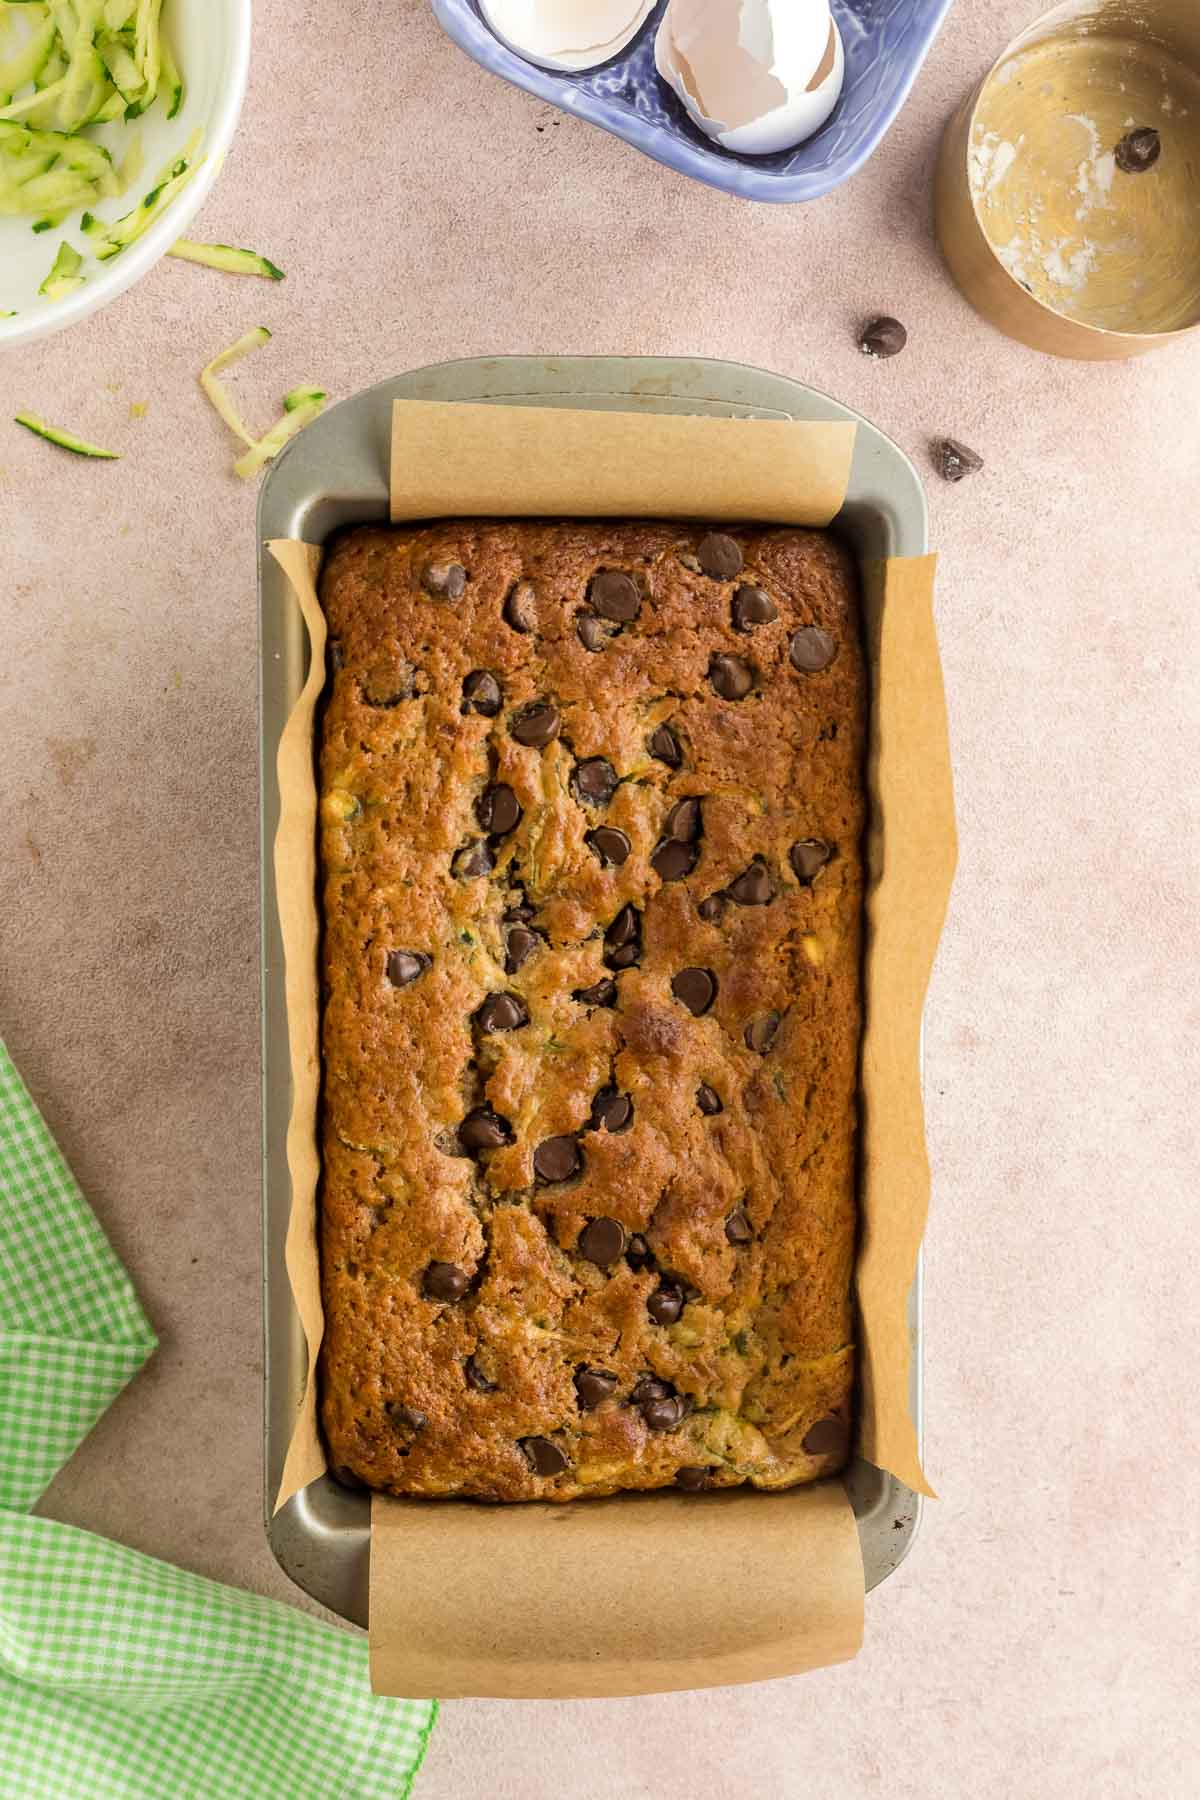 baked chocolate chip zucchini bread